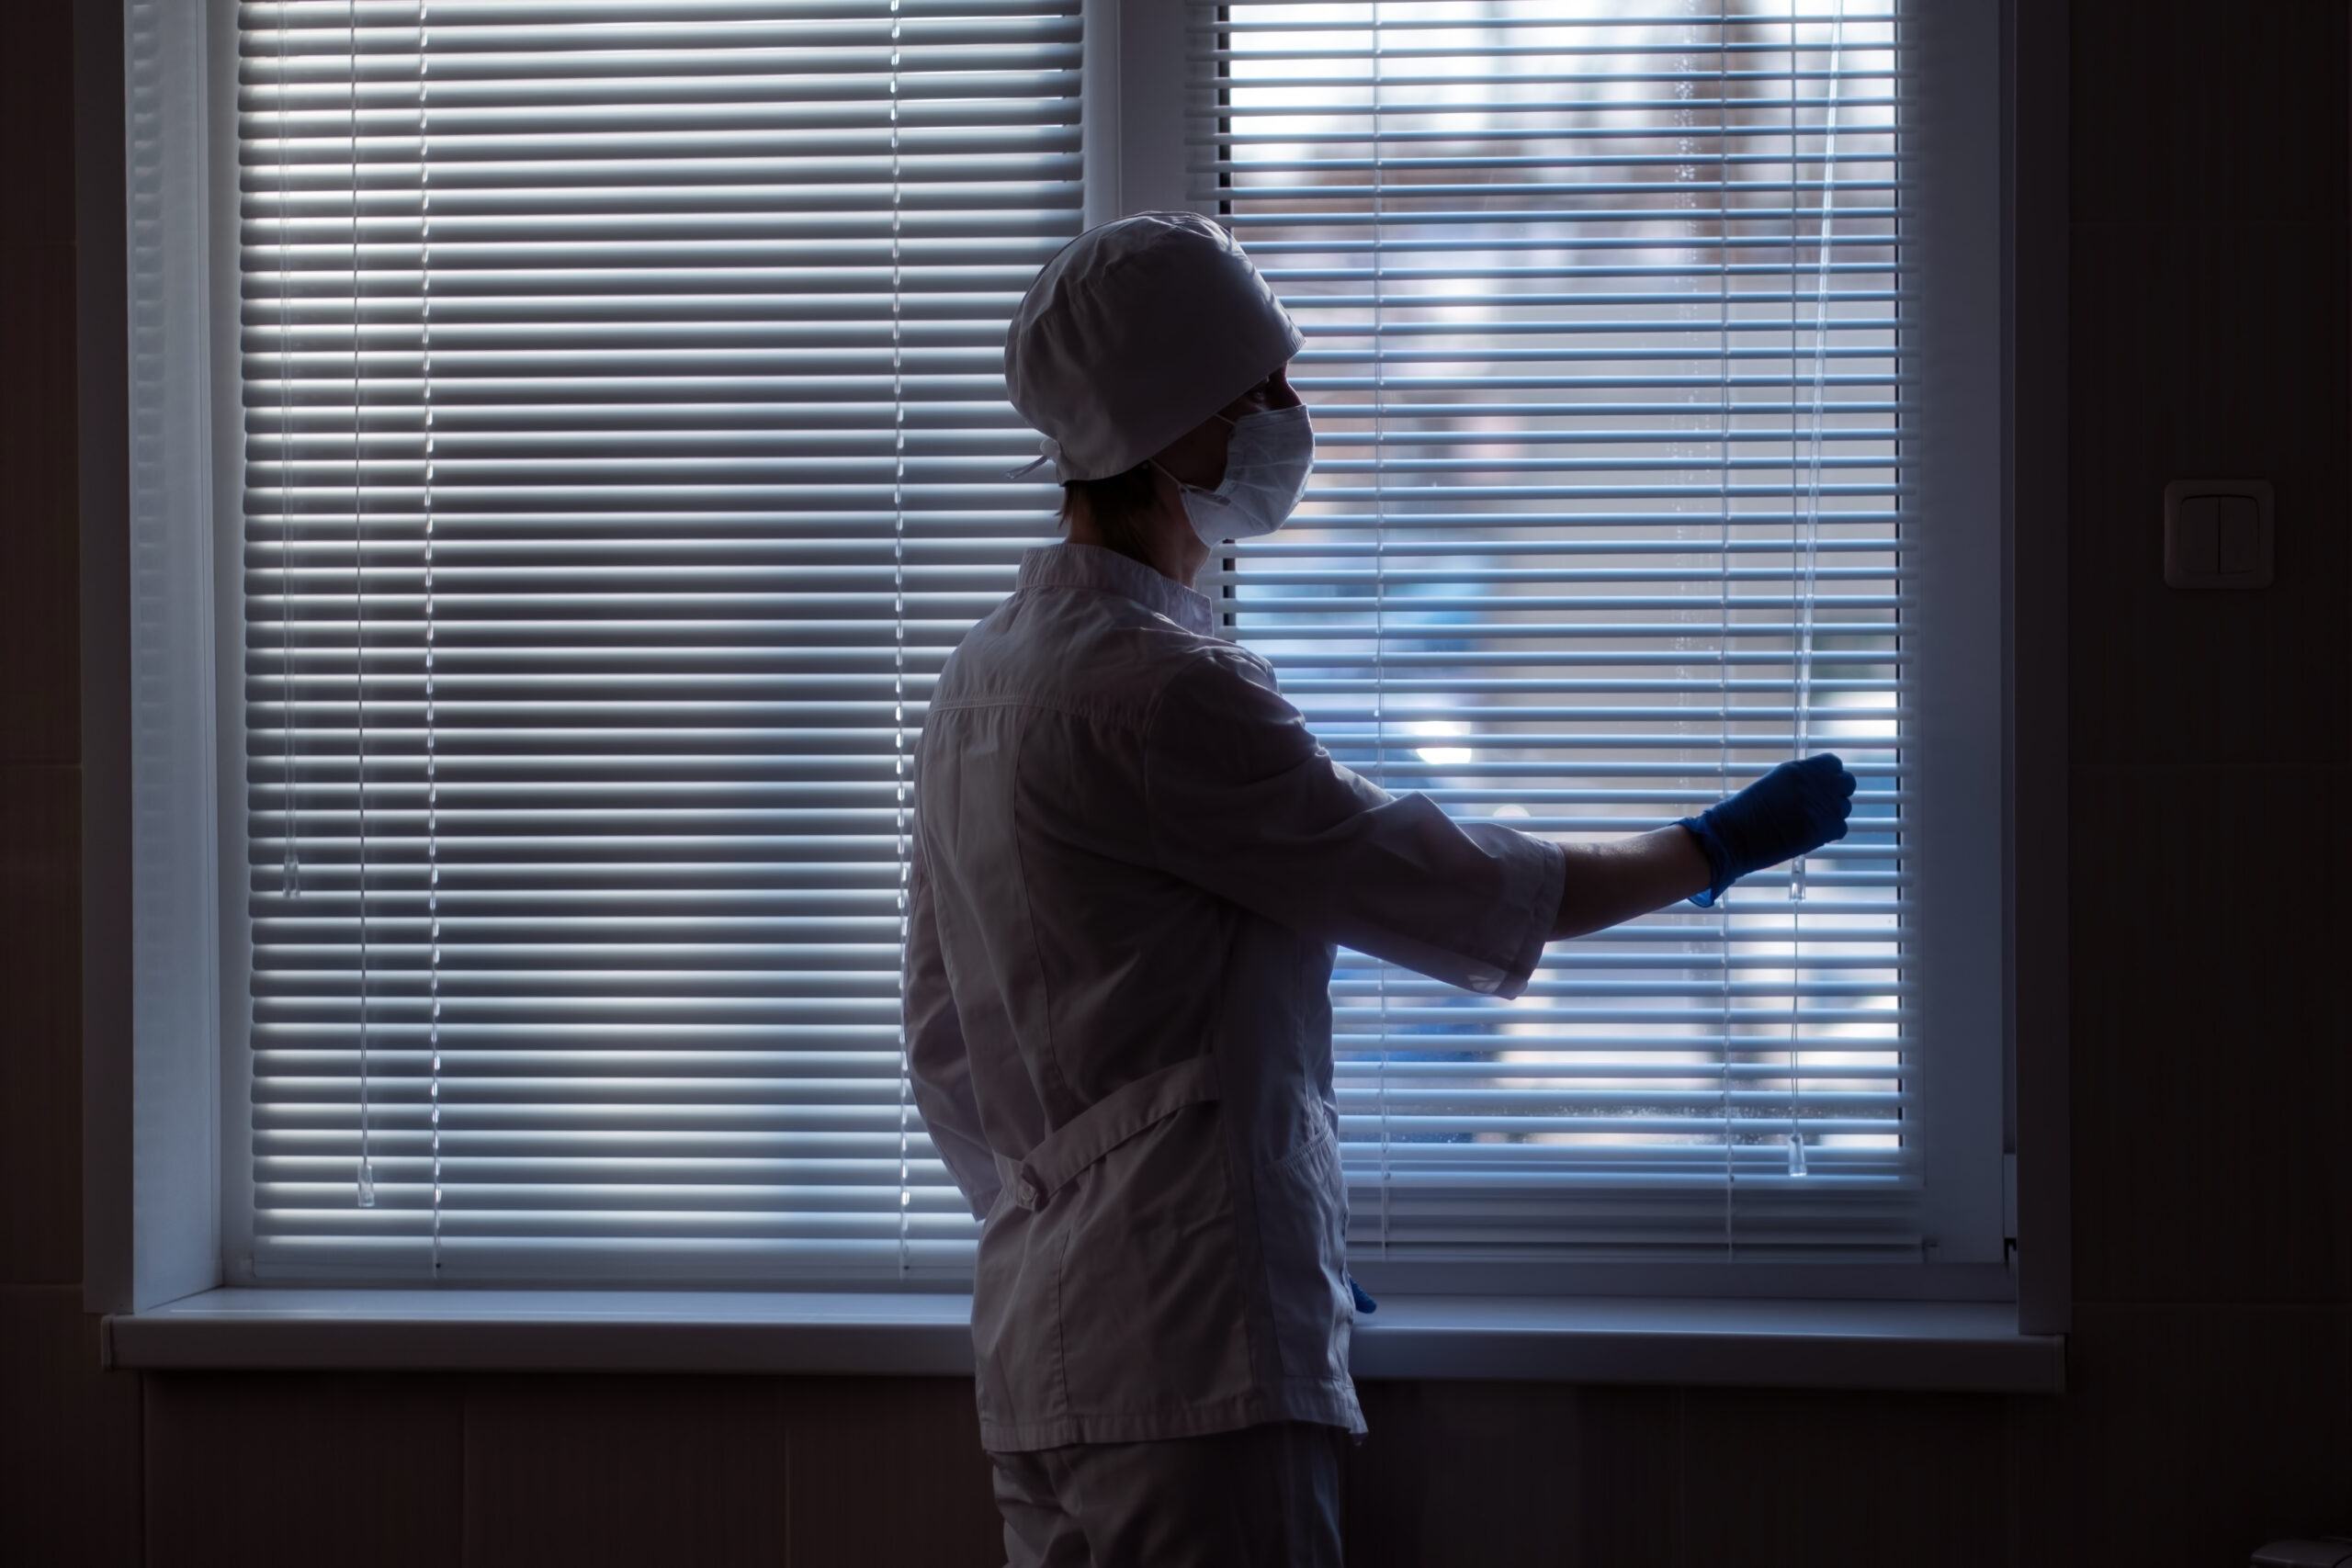 A Female Doctor Closes The Blinds On A Window In A Hospital, Rear View.